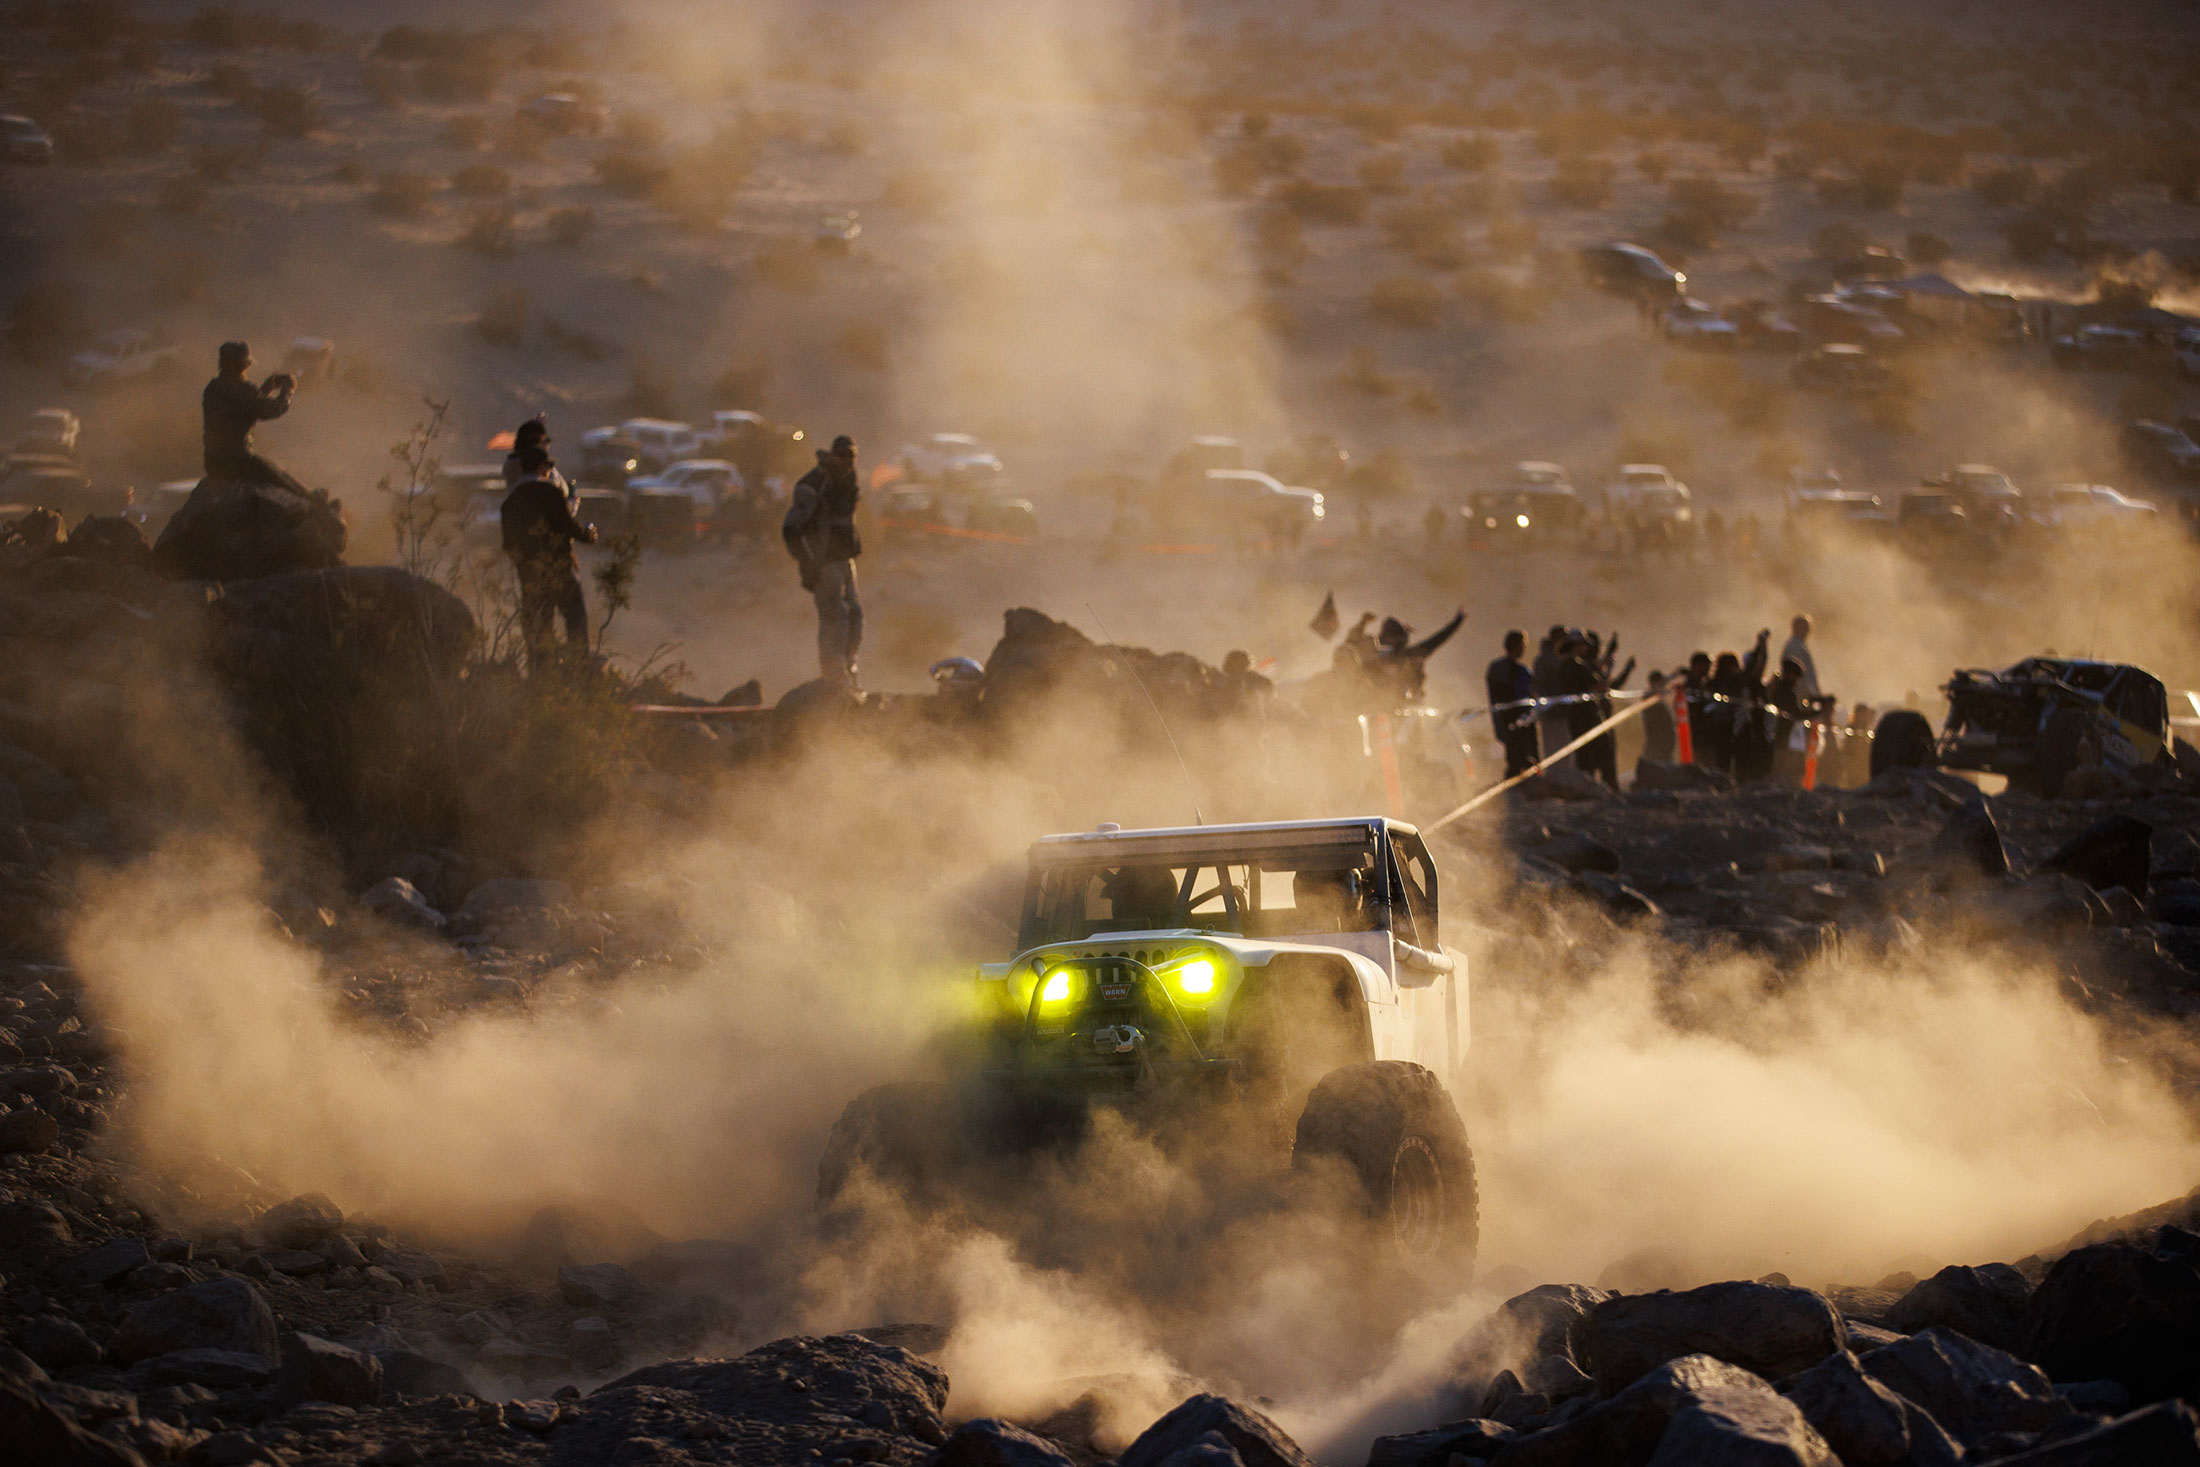 King of The Hammers 2022 Mad Max Meets Burning Man in OffRoad Desert